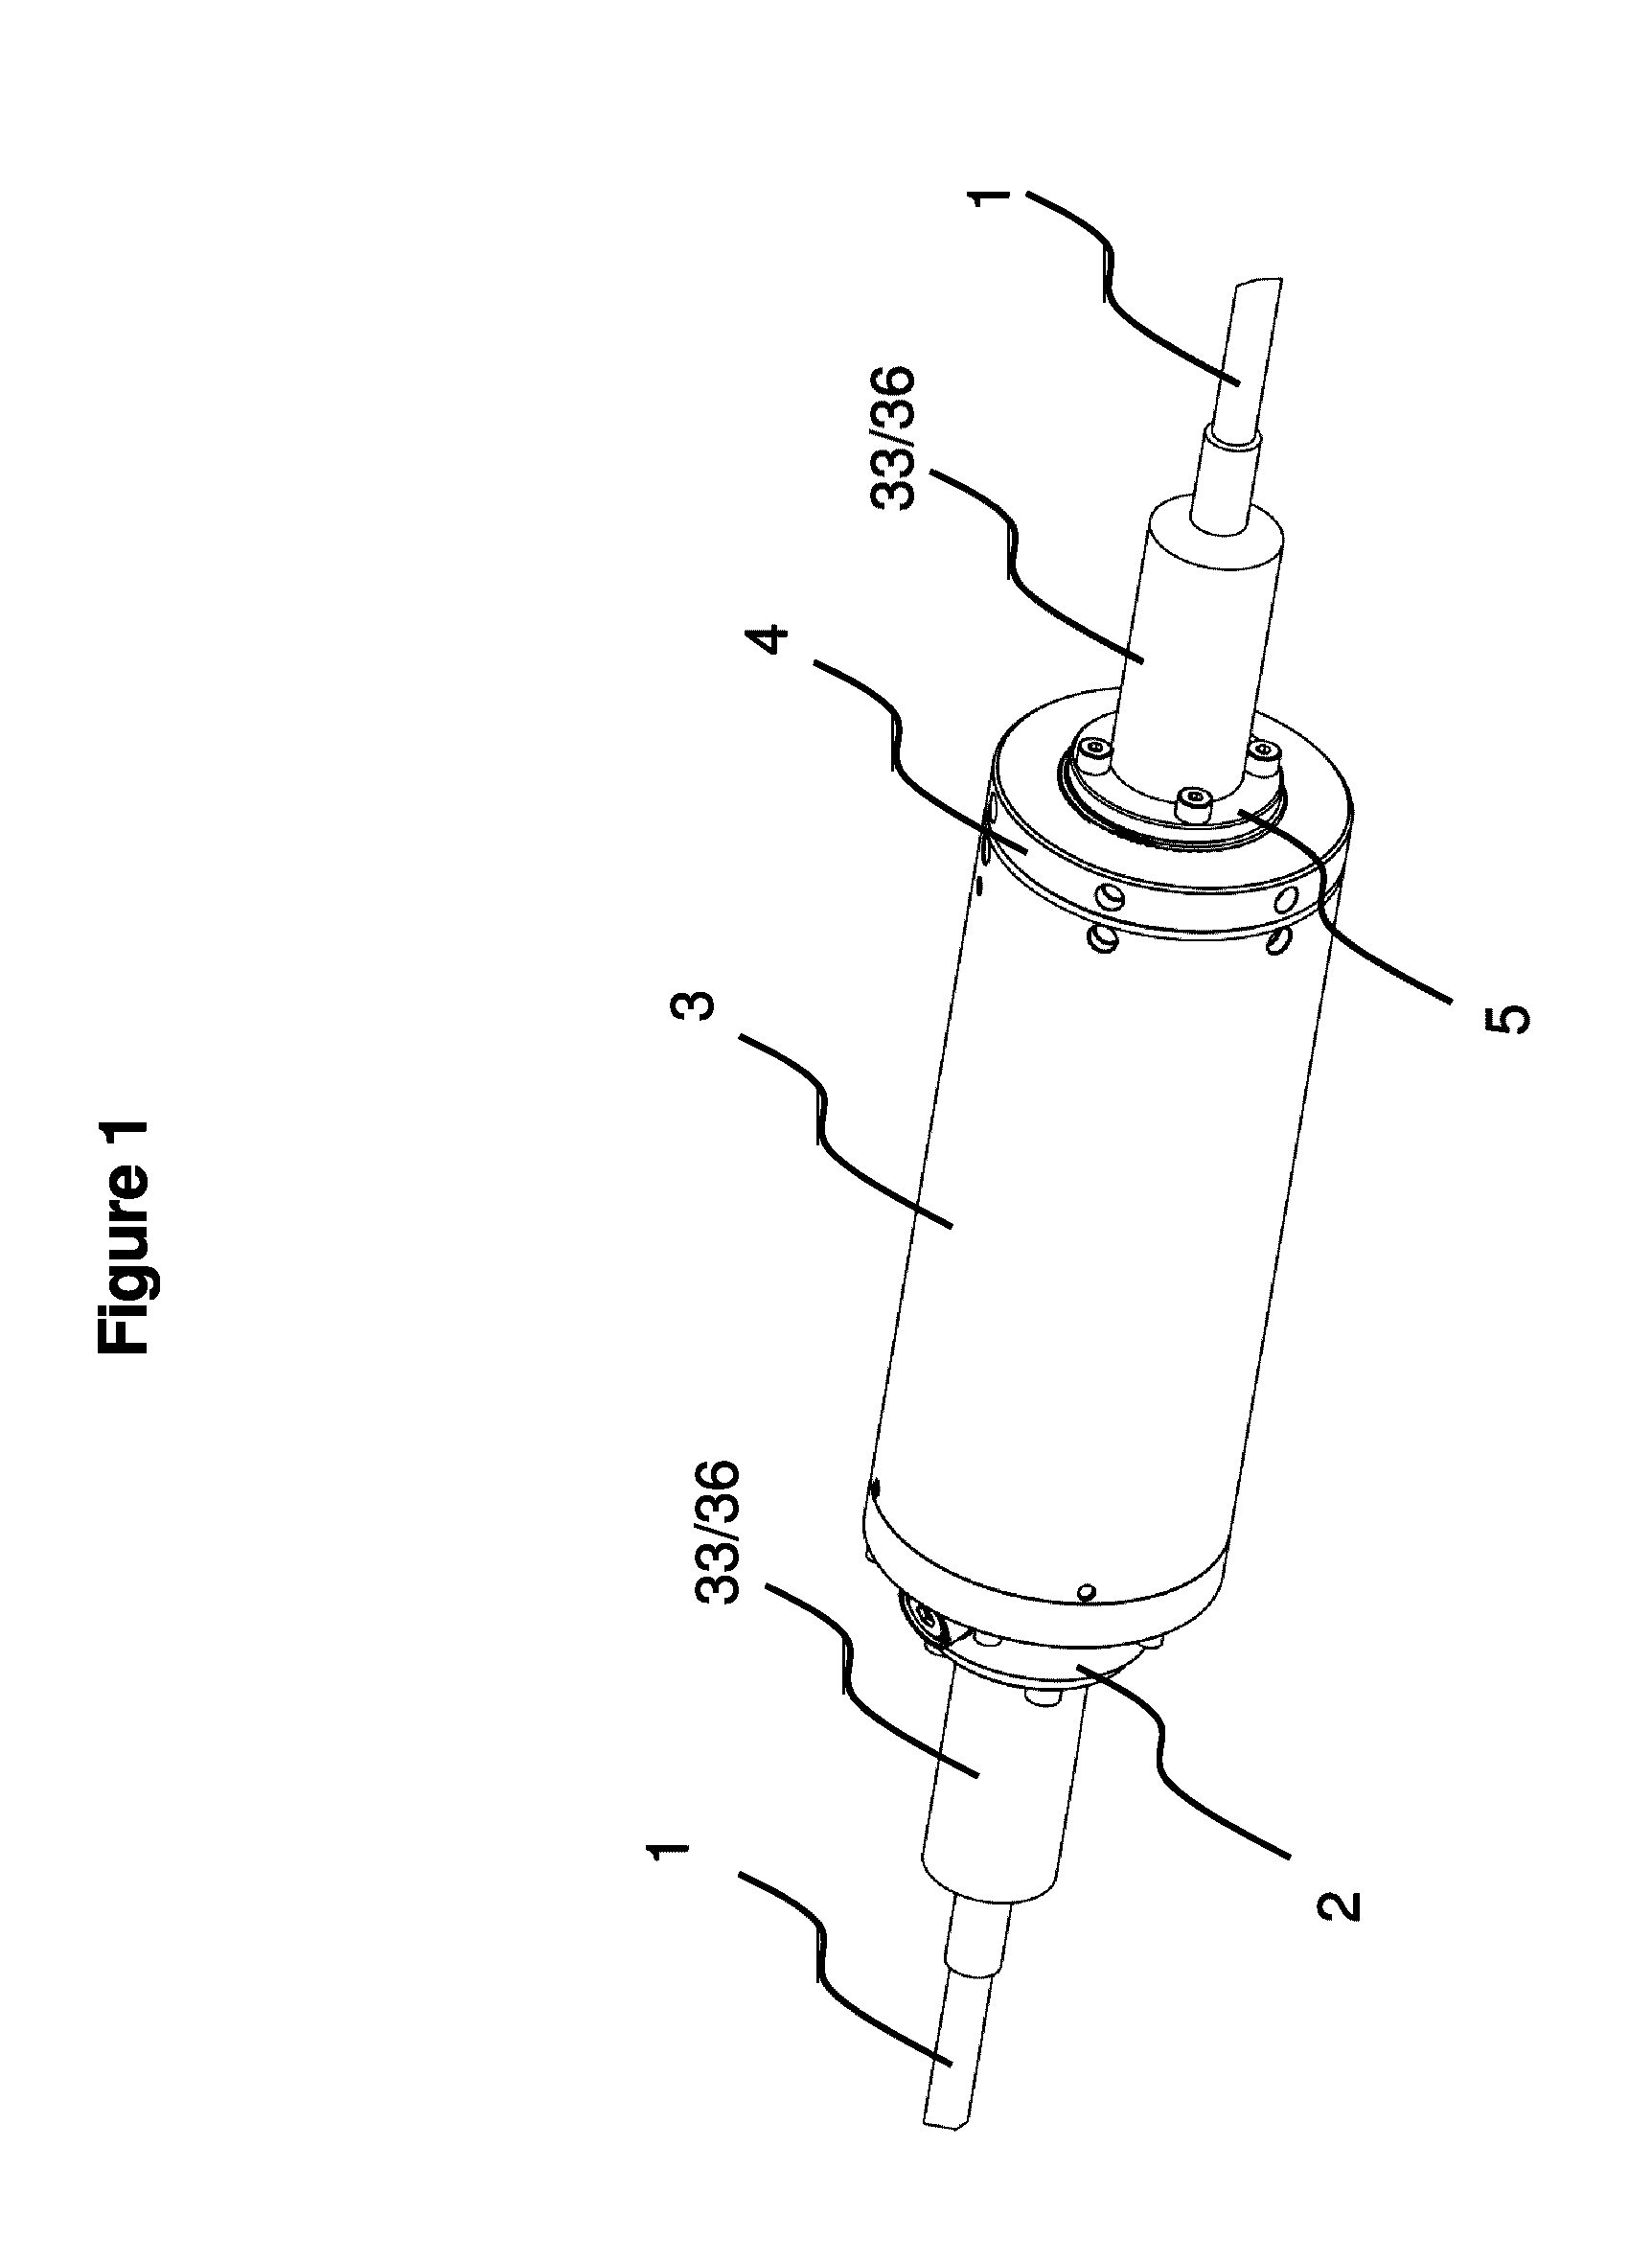 Cylindrical housing with locking ring